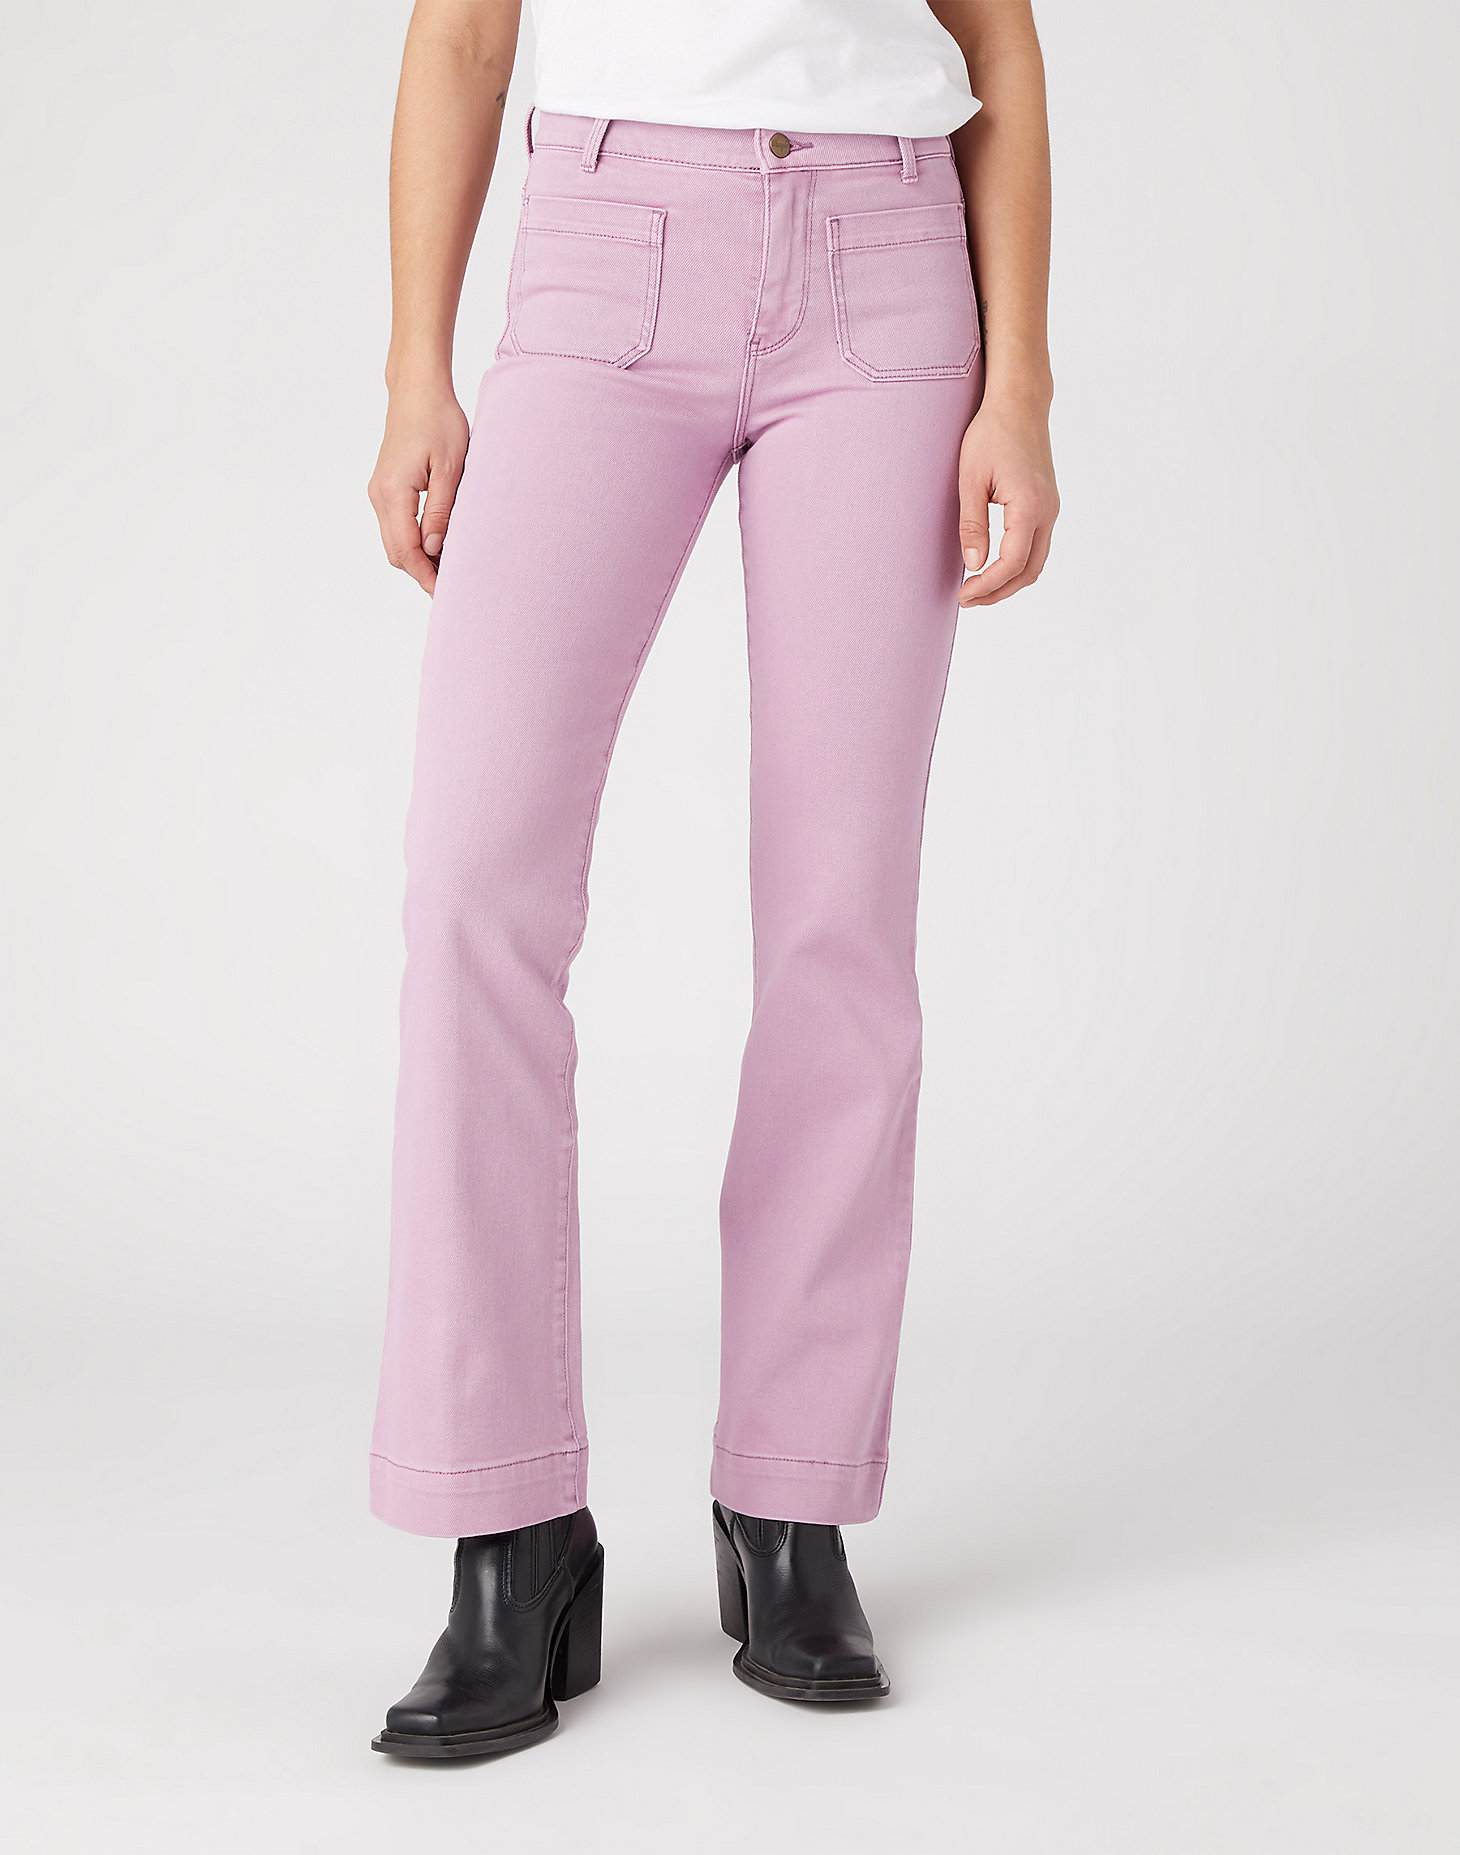 Flare Jeans in Smokey Grape main view